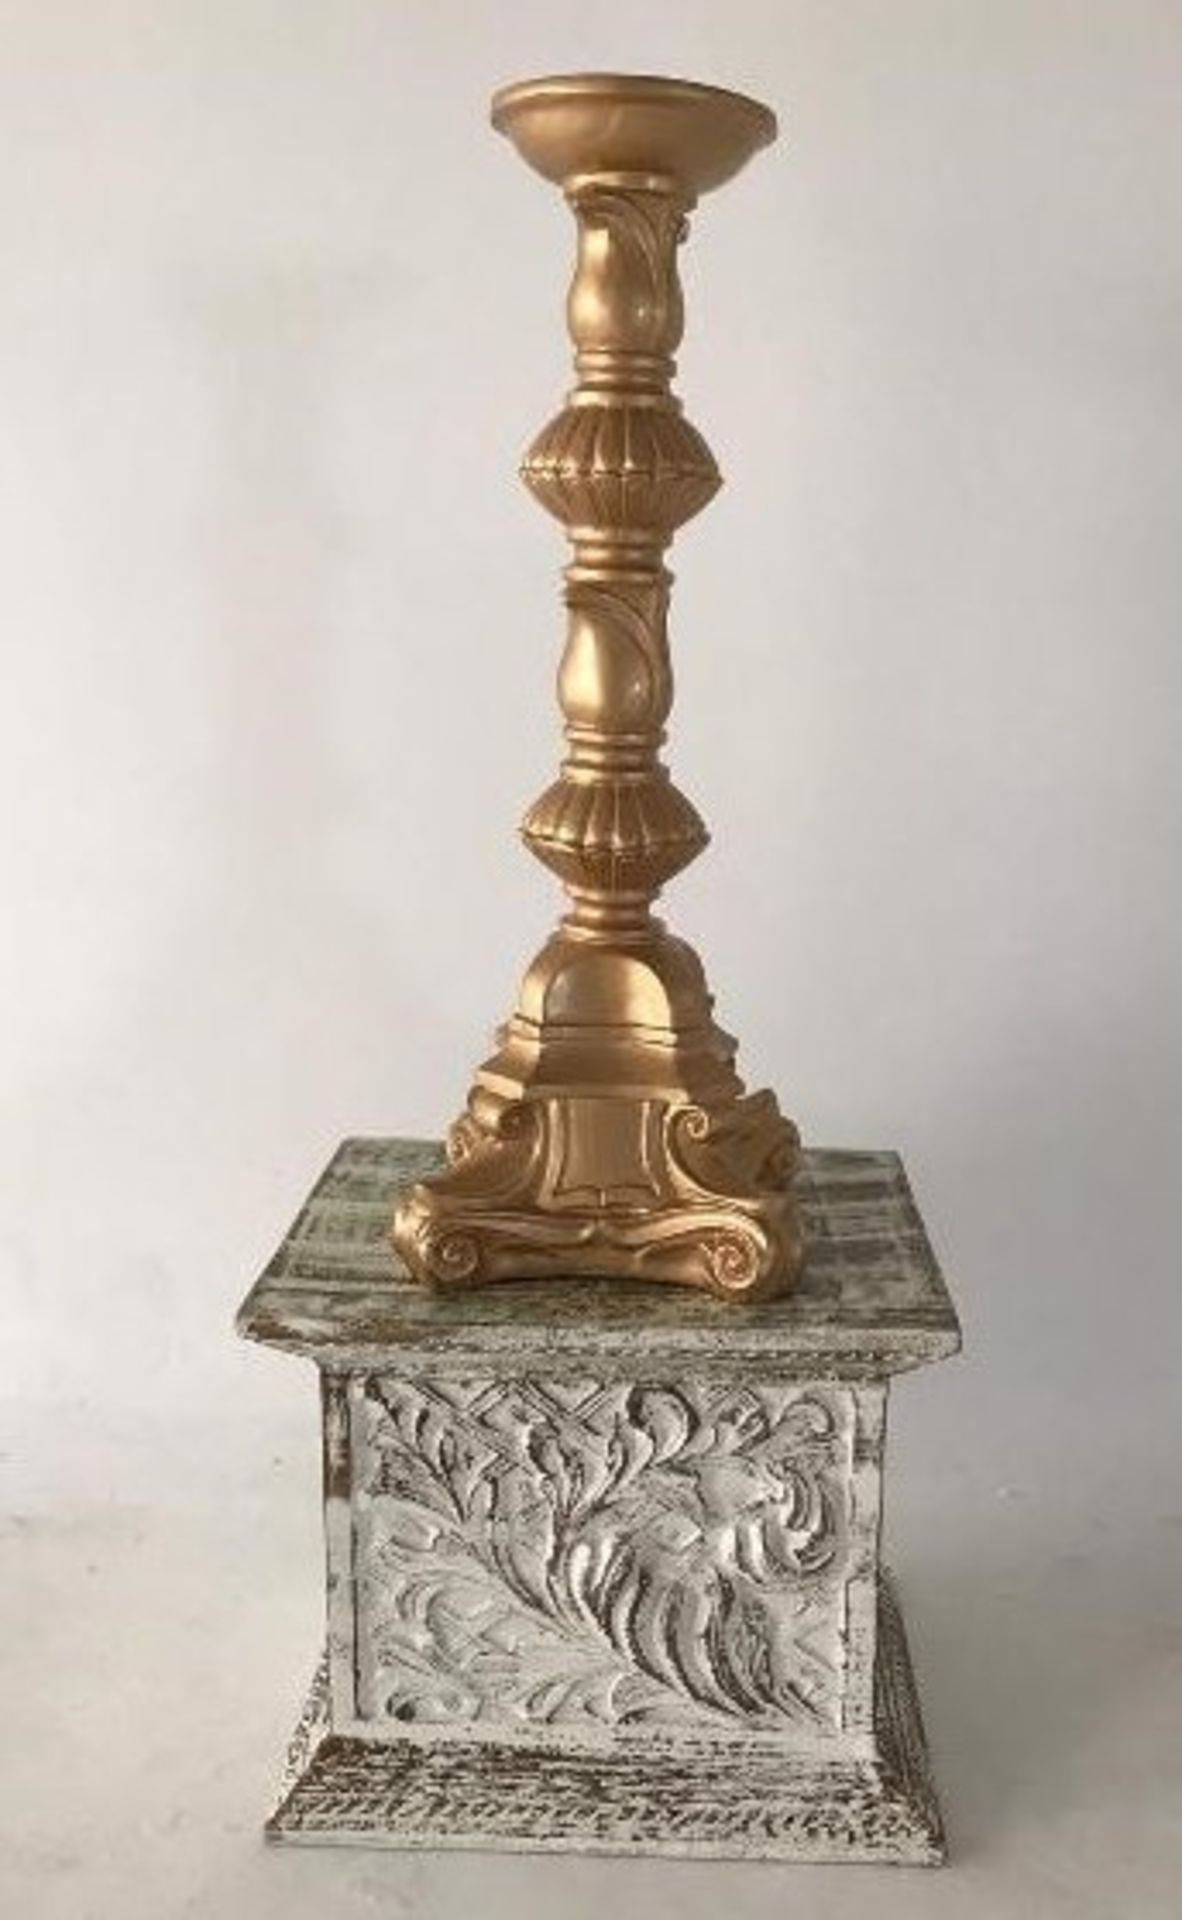 2 x Ornate Gold Flower Stands - Dimensions: 1.2m - Pre-owned - CL548 - Location: Near Market - Image 2 of 3